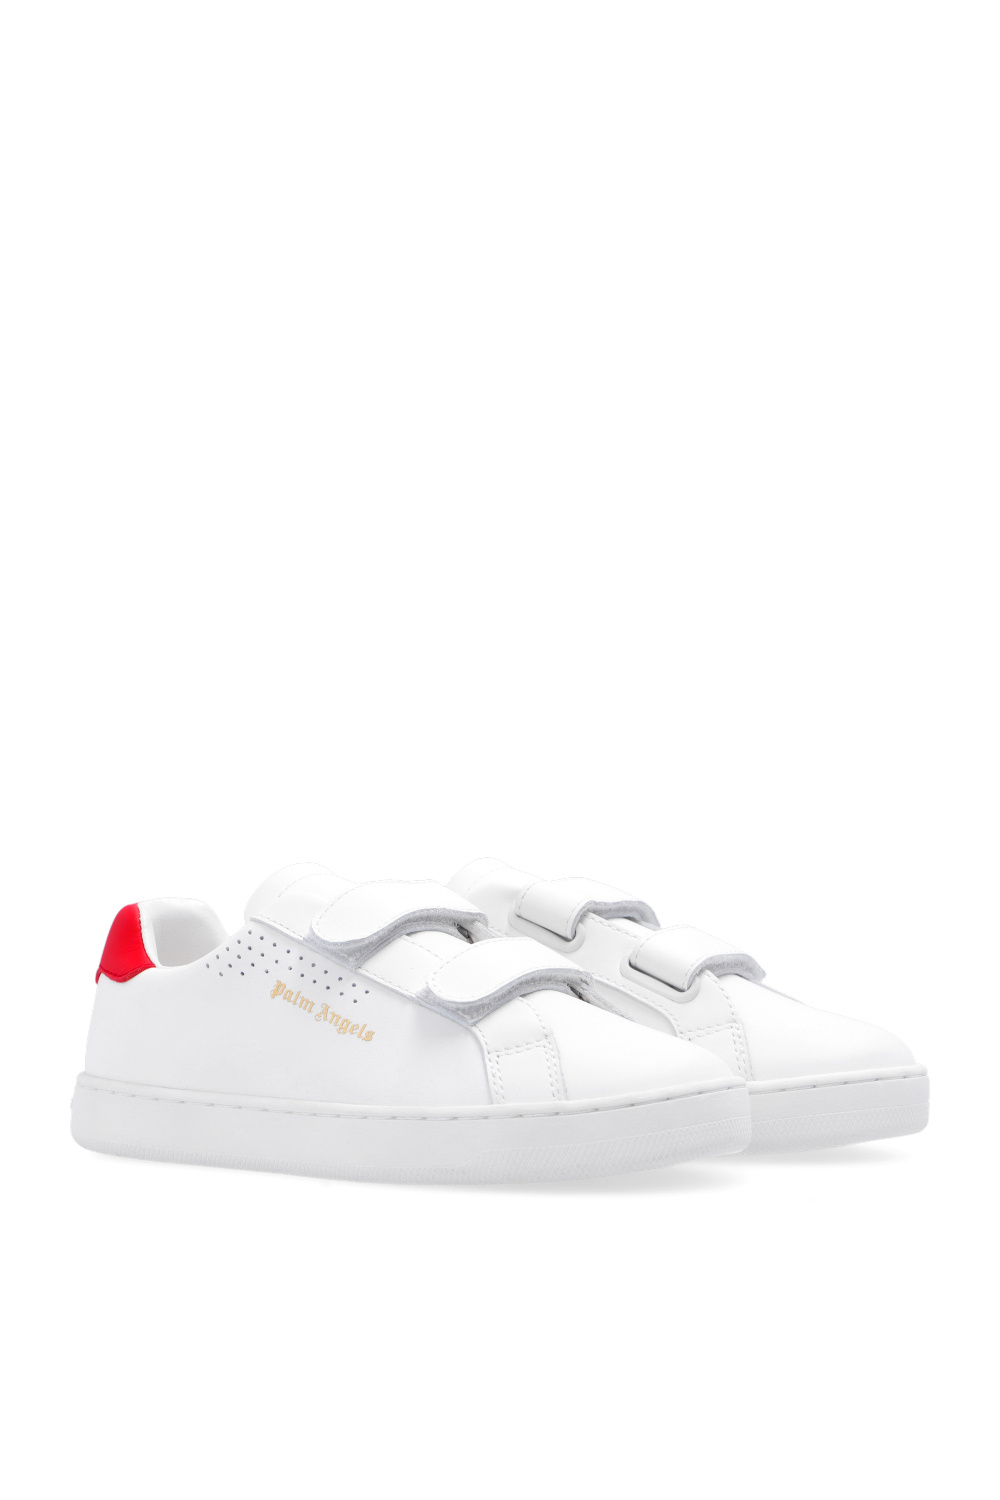 Spends Weekend In 3.1 Phillip Lim Boots ‘Palm 1 Strap’ sneakers